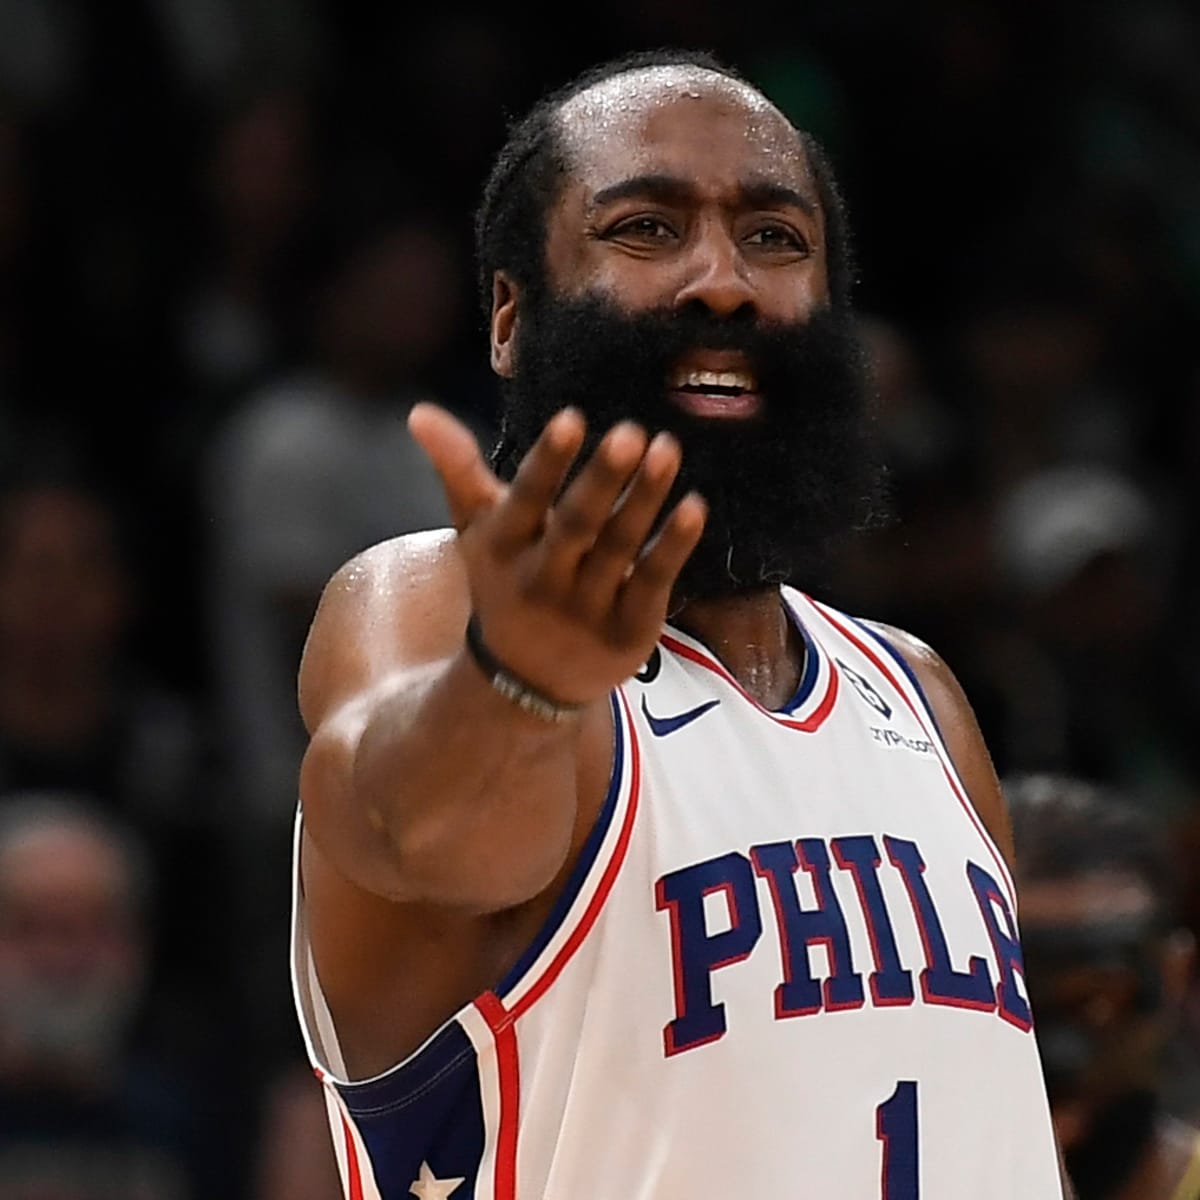 SIXERS JAMES HARDEN LOOKS SCULPTED FOR THE 2022-23 SEASON!